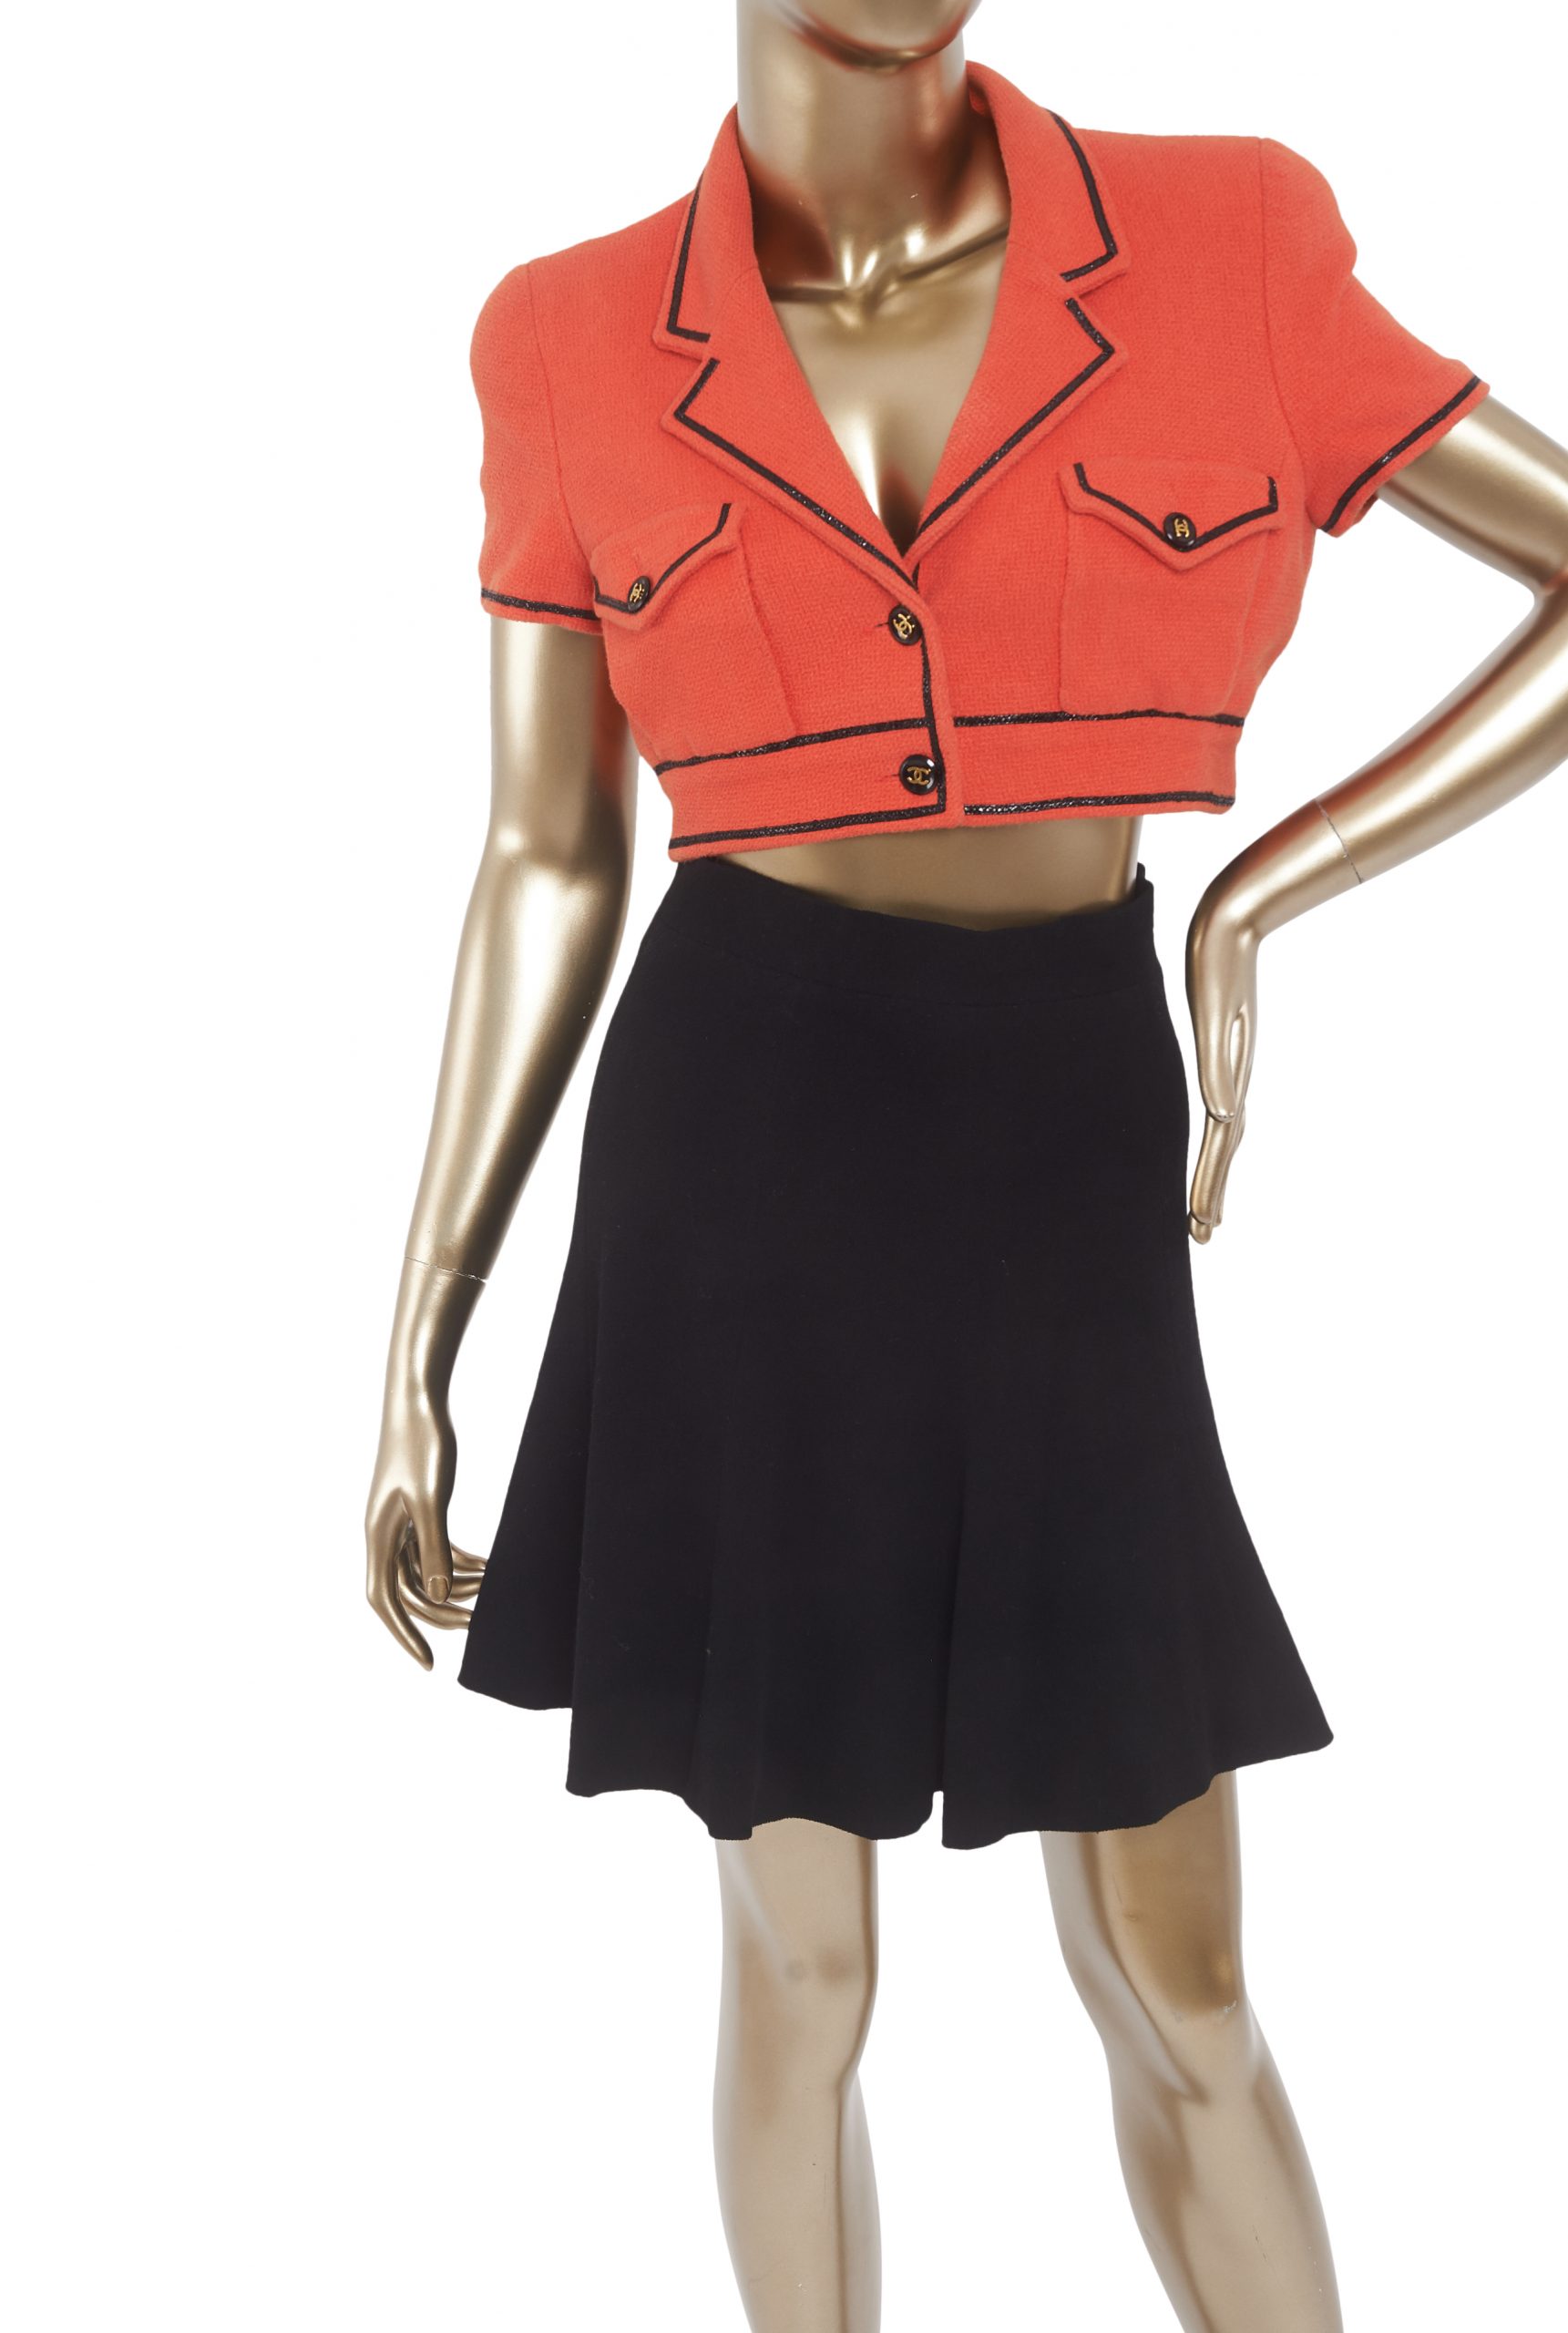 Chanel Crop Top and Short Set - Janet Mandell